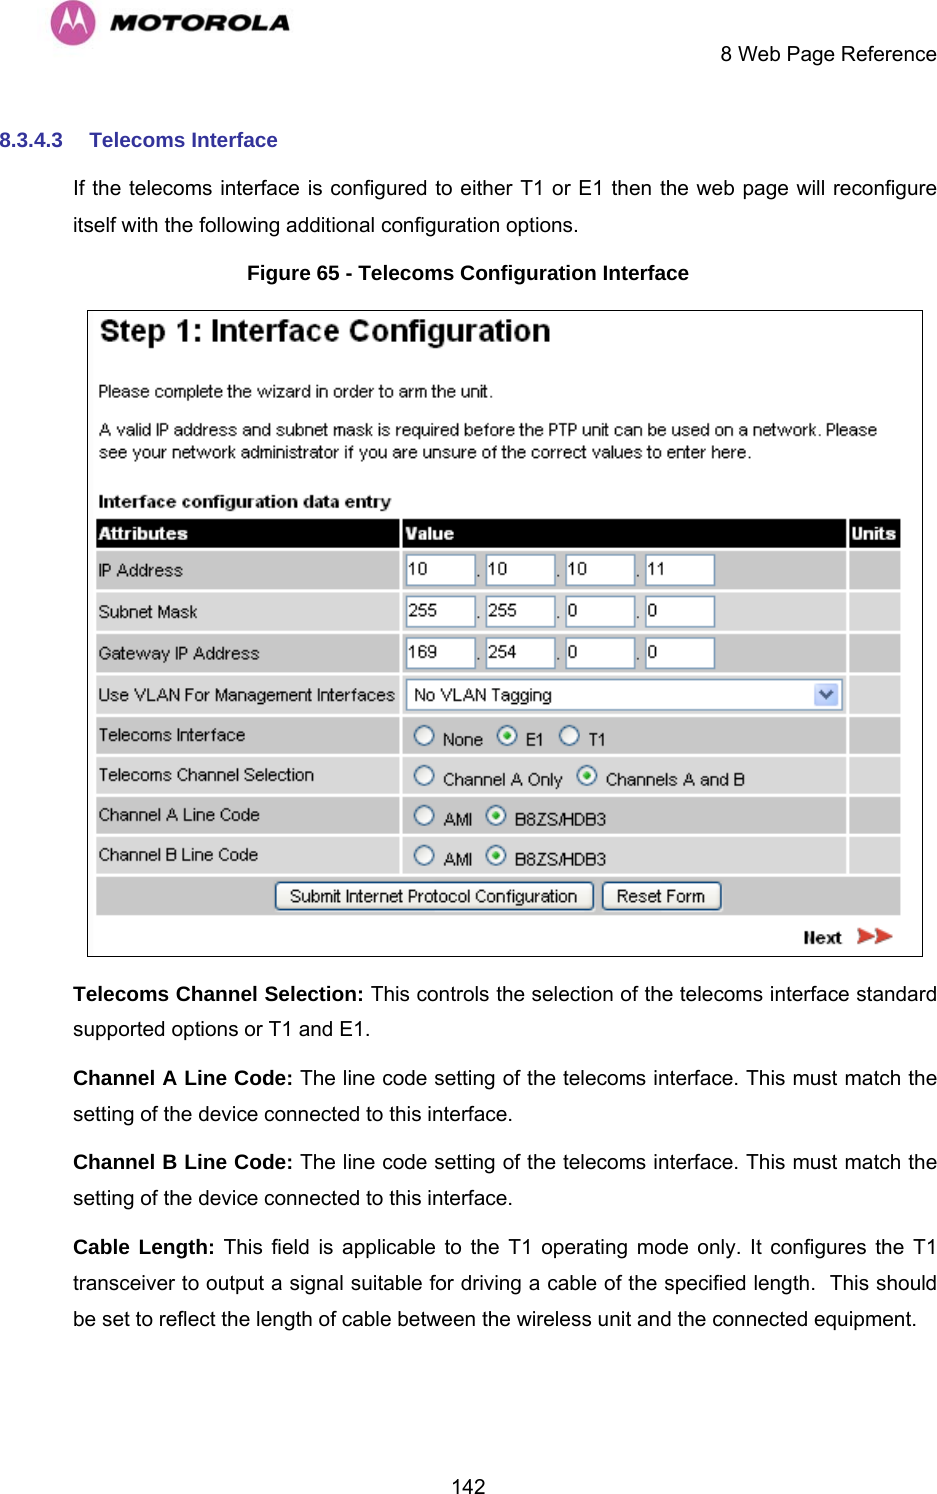     8 Web Page Reference  1428.3.4.3  Telecoms Interface If the telecoms interface is configured to either T1 or E1 then the web page will reconfigure itself with the following additional configuration options. Figure 65 - Telecoms Configuration Interface  Telecoms Channel Selection: This controls the selection of the telecoms interface standard supported options or T1 and E1. Channel A Line Code: The line code setting of the telecoms interface. This must match the setting of the device connected to this interface. Channel B Line Code: The line code setting of the telecoms interface. This must match the setting of the device connected to this interface. Cable Length: This field is applicable to the T1 operating mode only. It configures the T1 transceiver to output a signal suitable for driving a cable of the specified length.  This should be set to reflect the length of cable between the wireless unit and the connected equipment. 